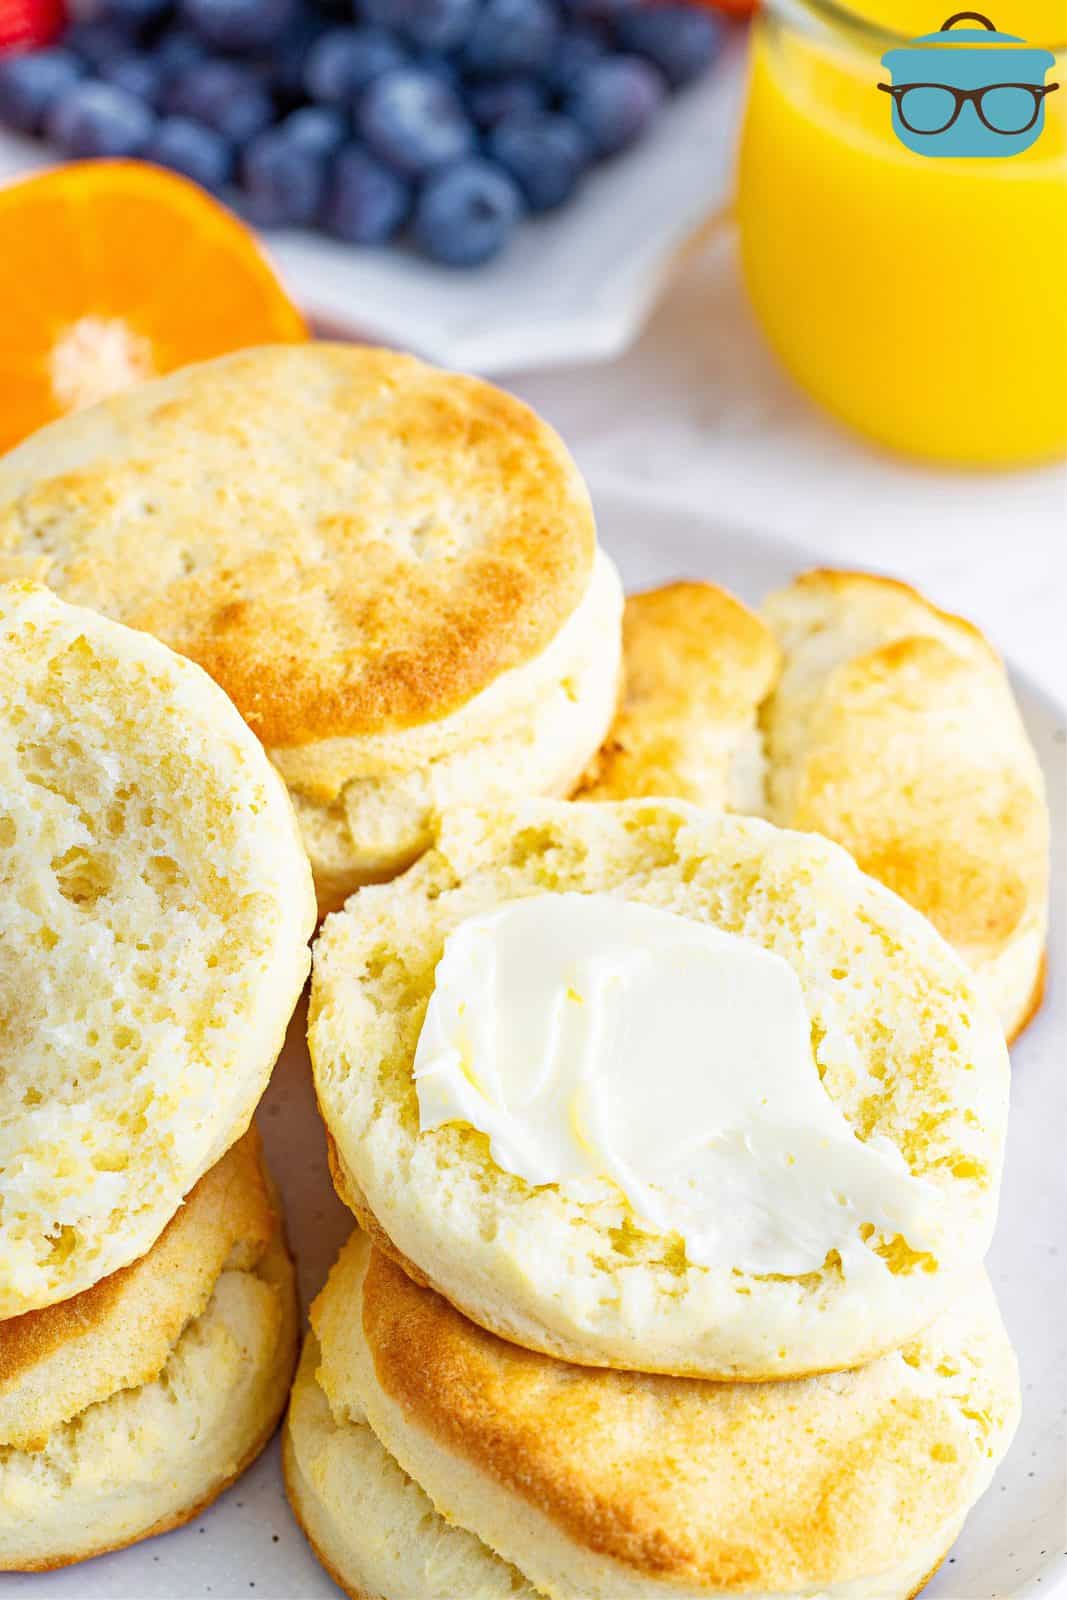 butter spread on the inside of a cream biscuits.